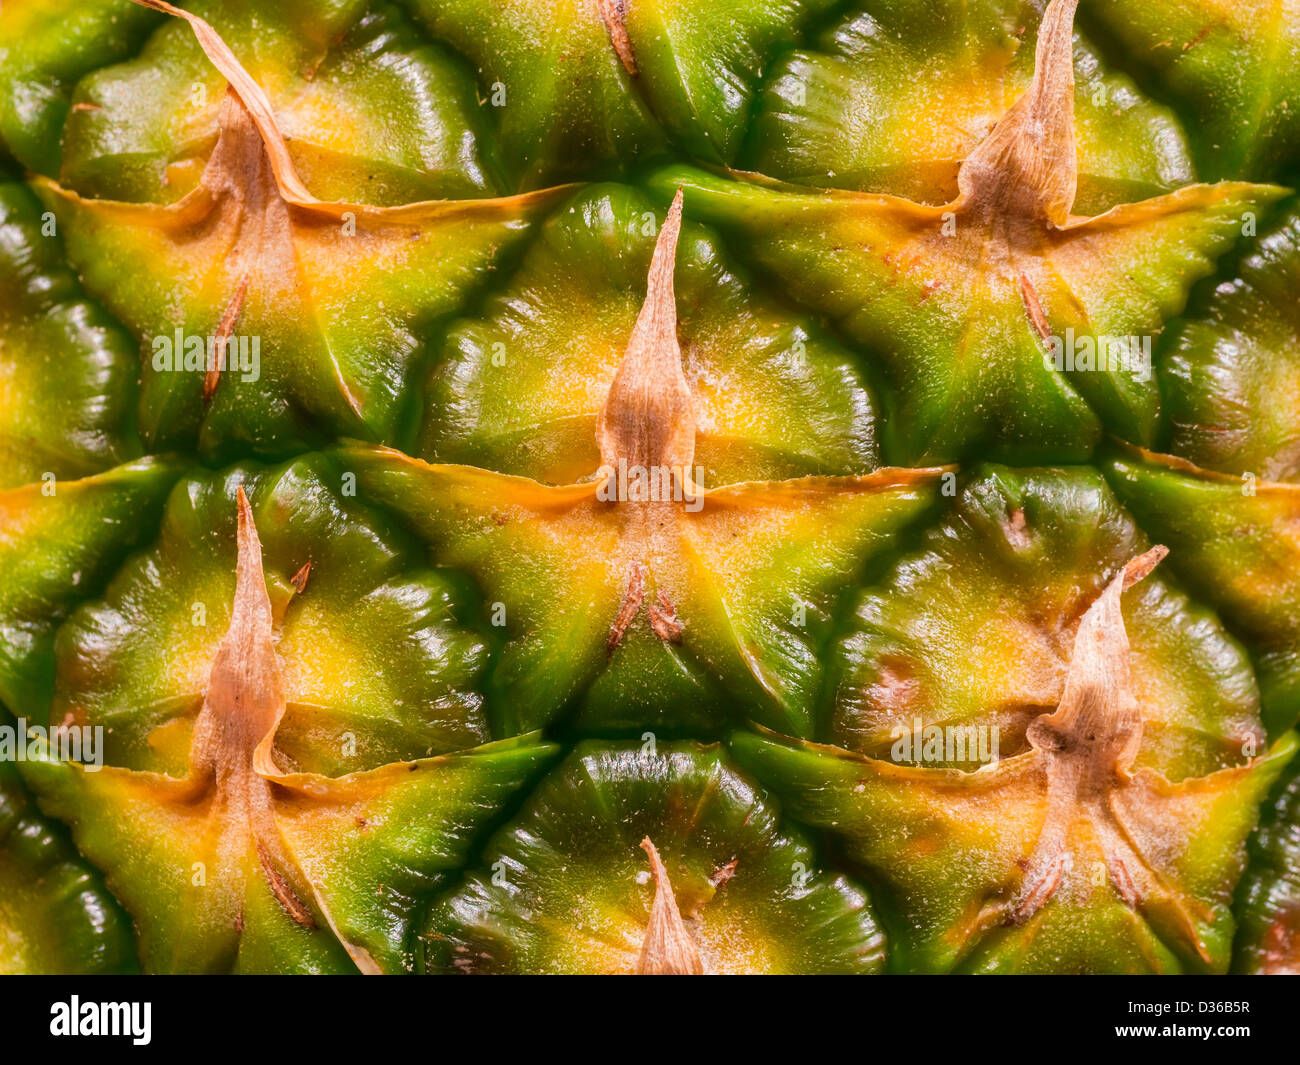 Close-up details of the skin of a fresh pineapple fruit (Ananas comosus). Stock Photo